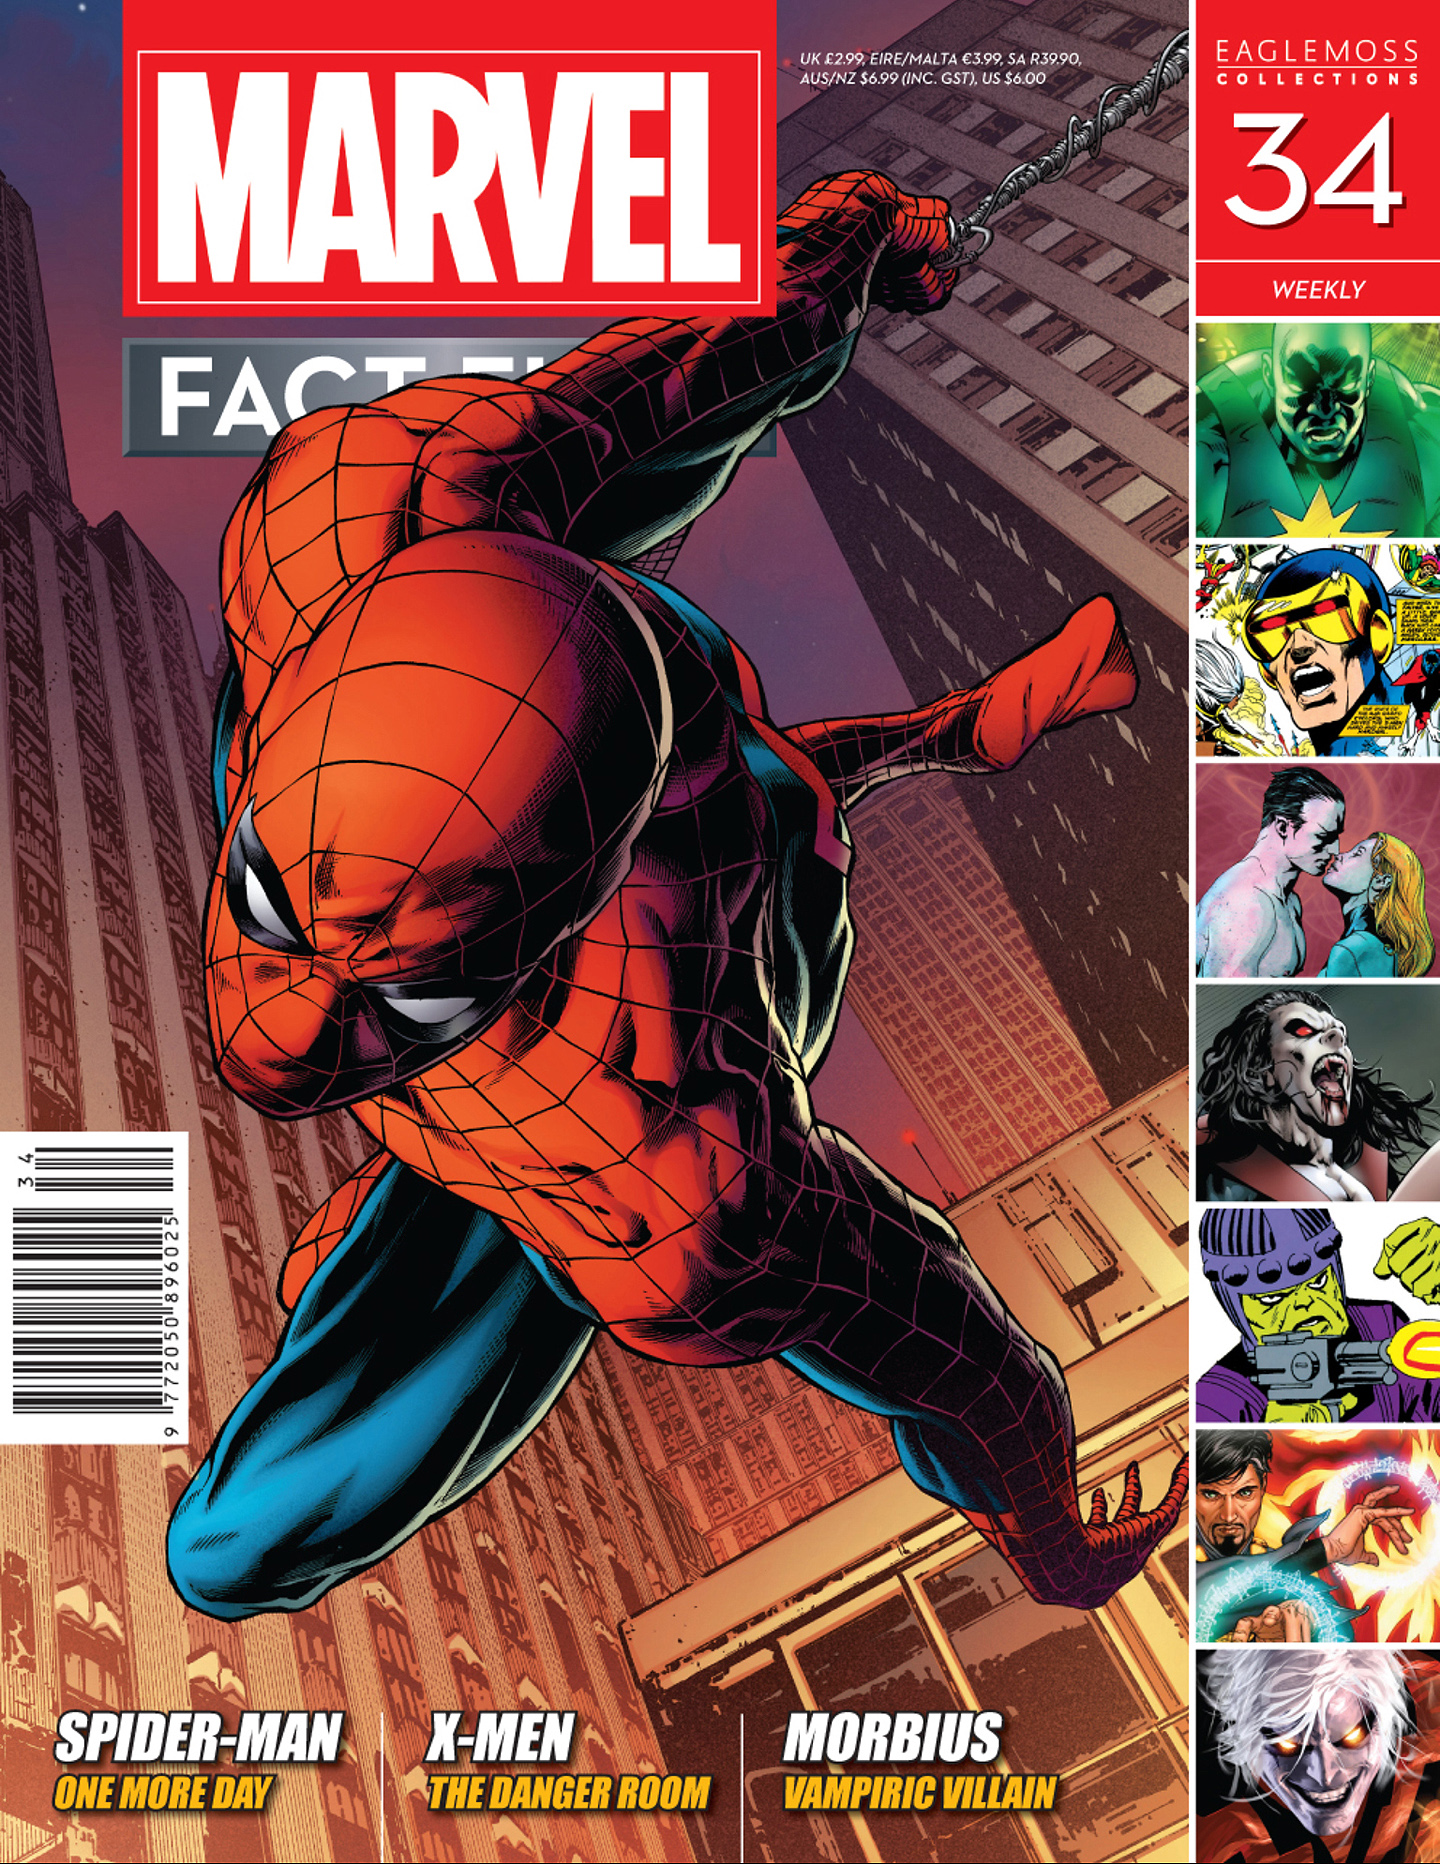 Read online Marvel Fact Files comic -  Issue #34 - 2